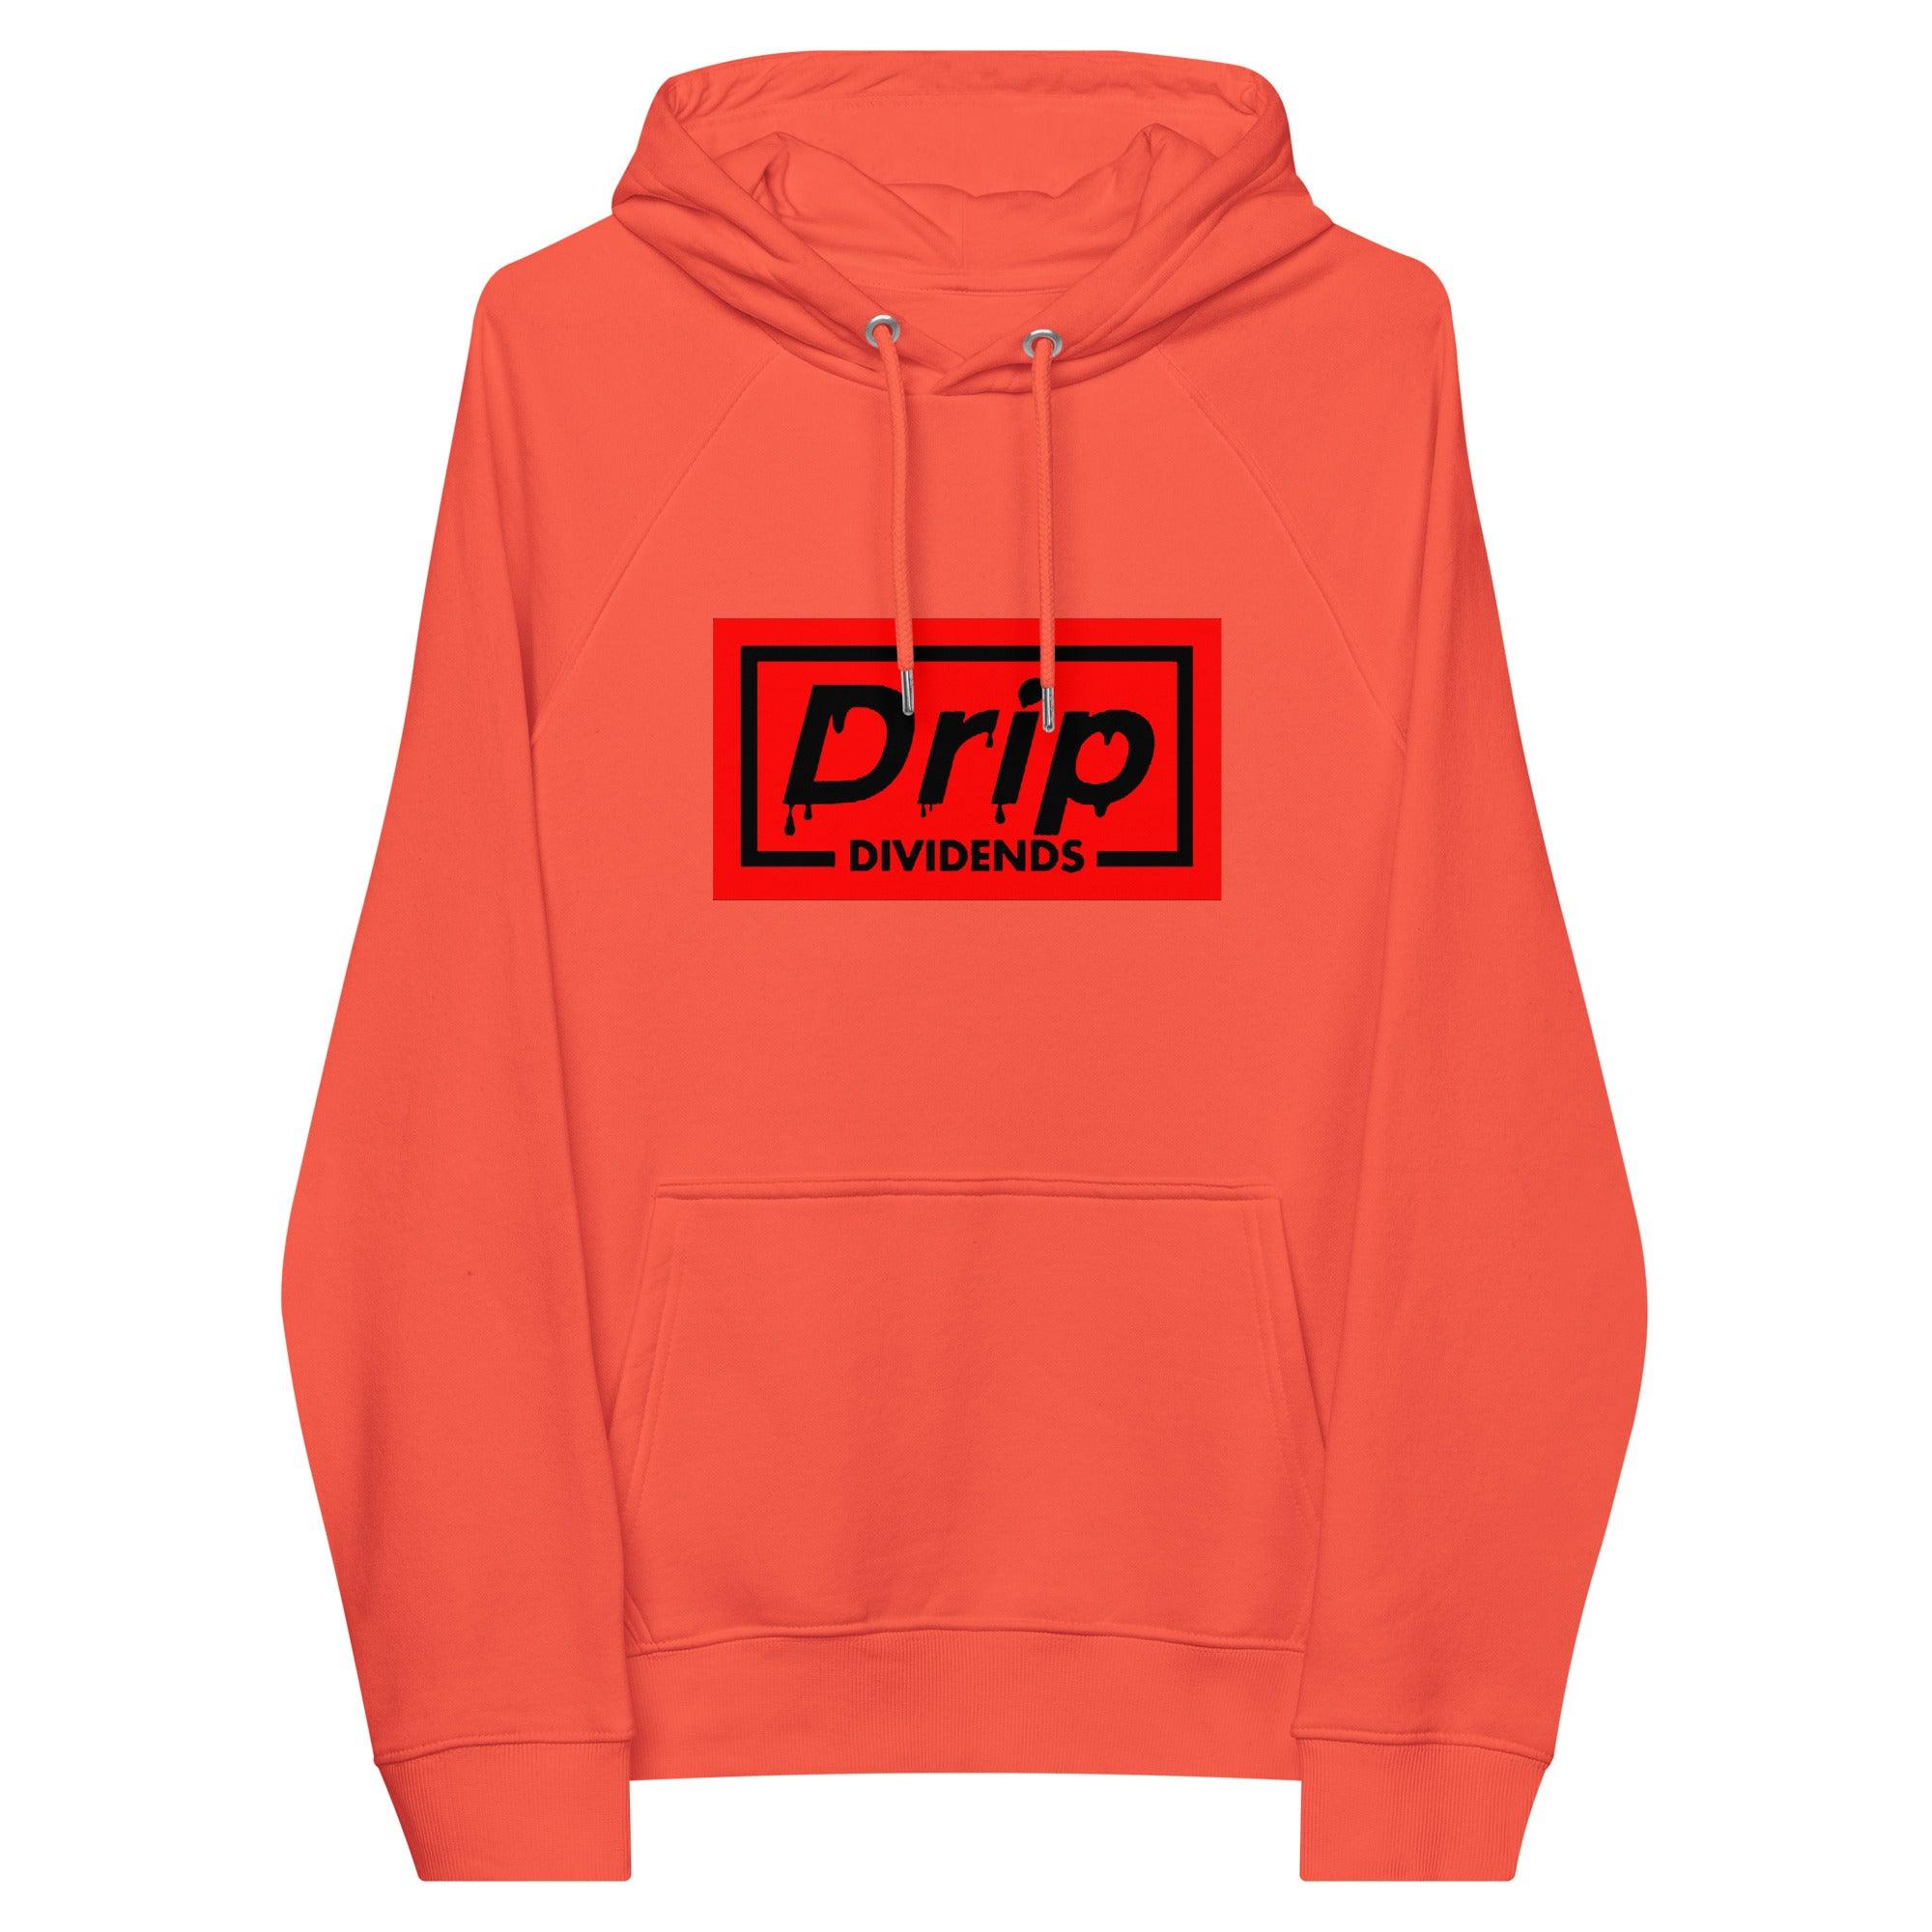 DRIP | Dividends Pullover Hoodie - InvestmenTees